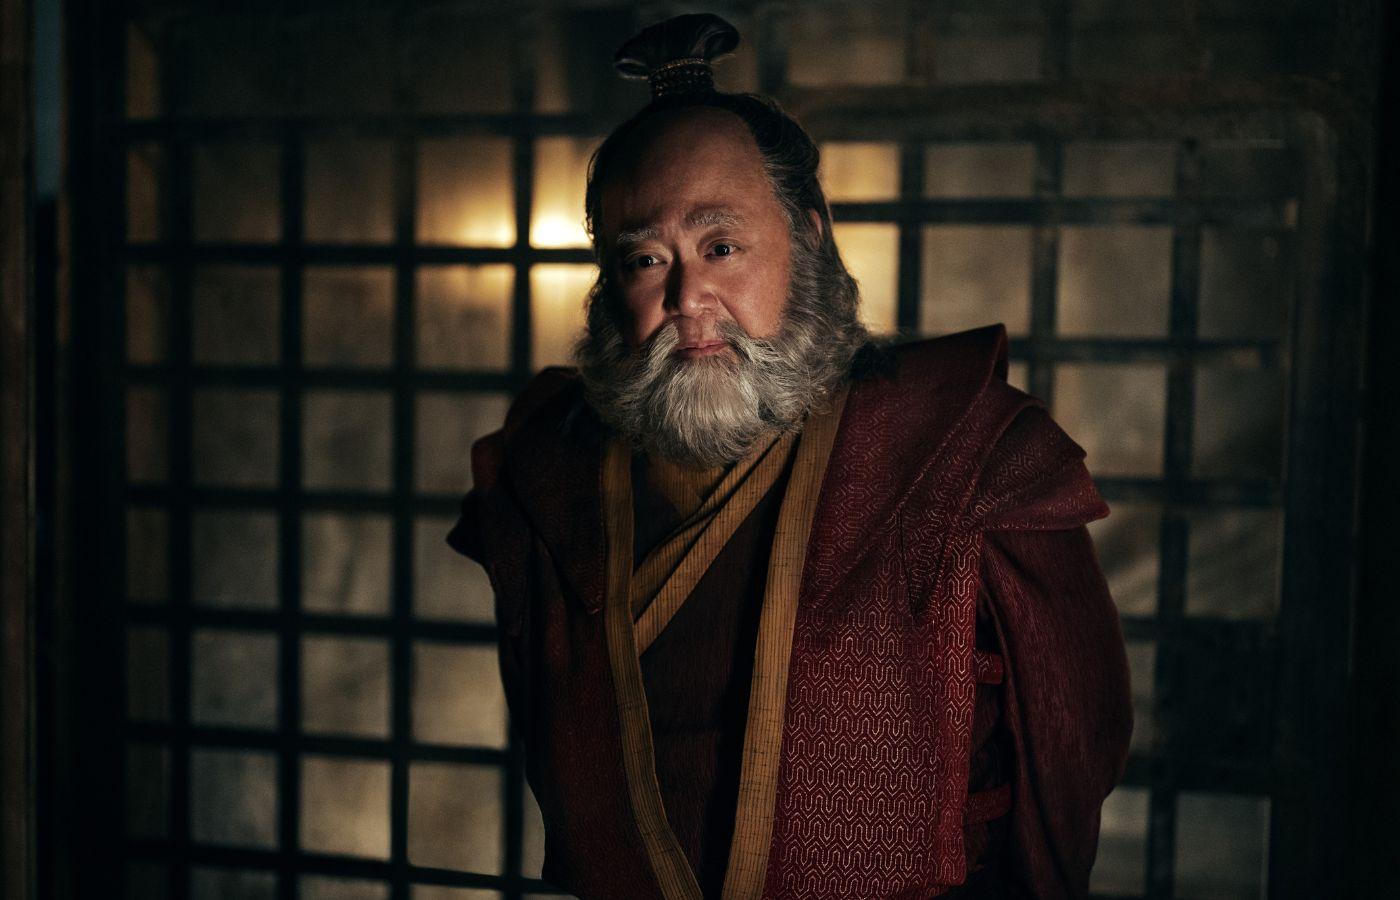 Uncle Iroh in Avatar: The Last Airbender